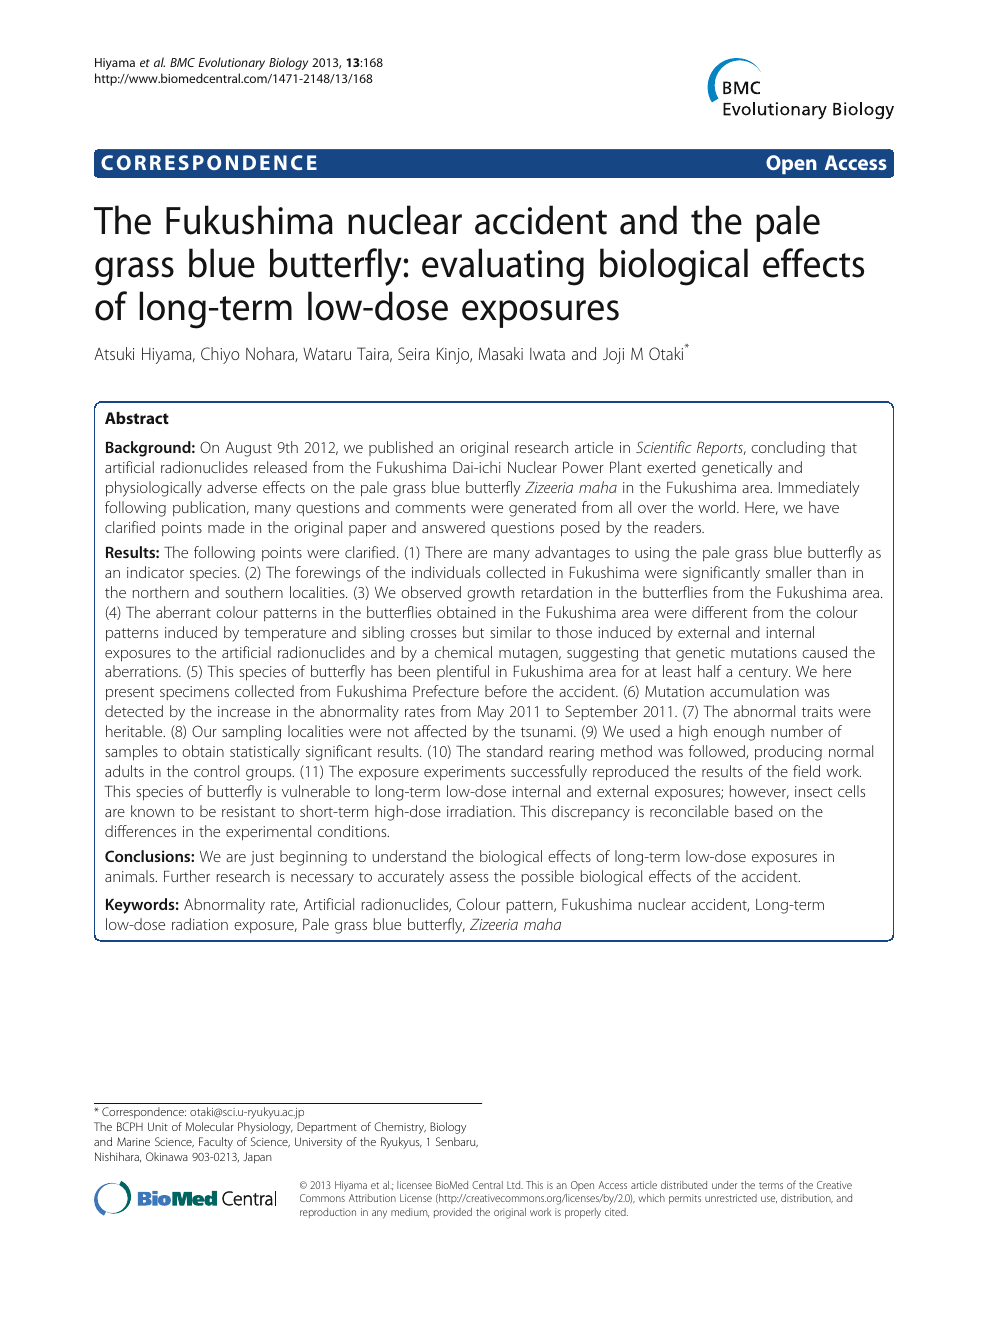 The Fukushima Nuclear Accident And The Pale Grass Blue Butterfly Evaluating Biological Effects Of Long Term Low Dose Exposures Topic Of Research Paper In Biological Sciences Download Scholarly Article Pdf And Read For